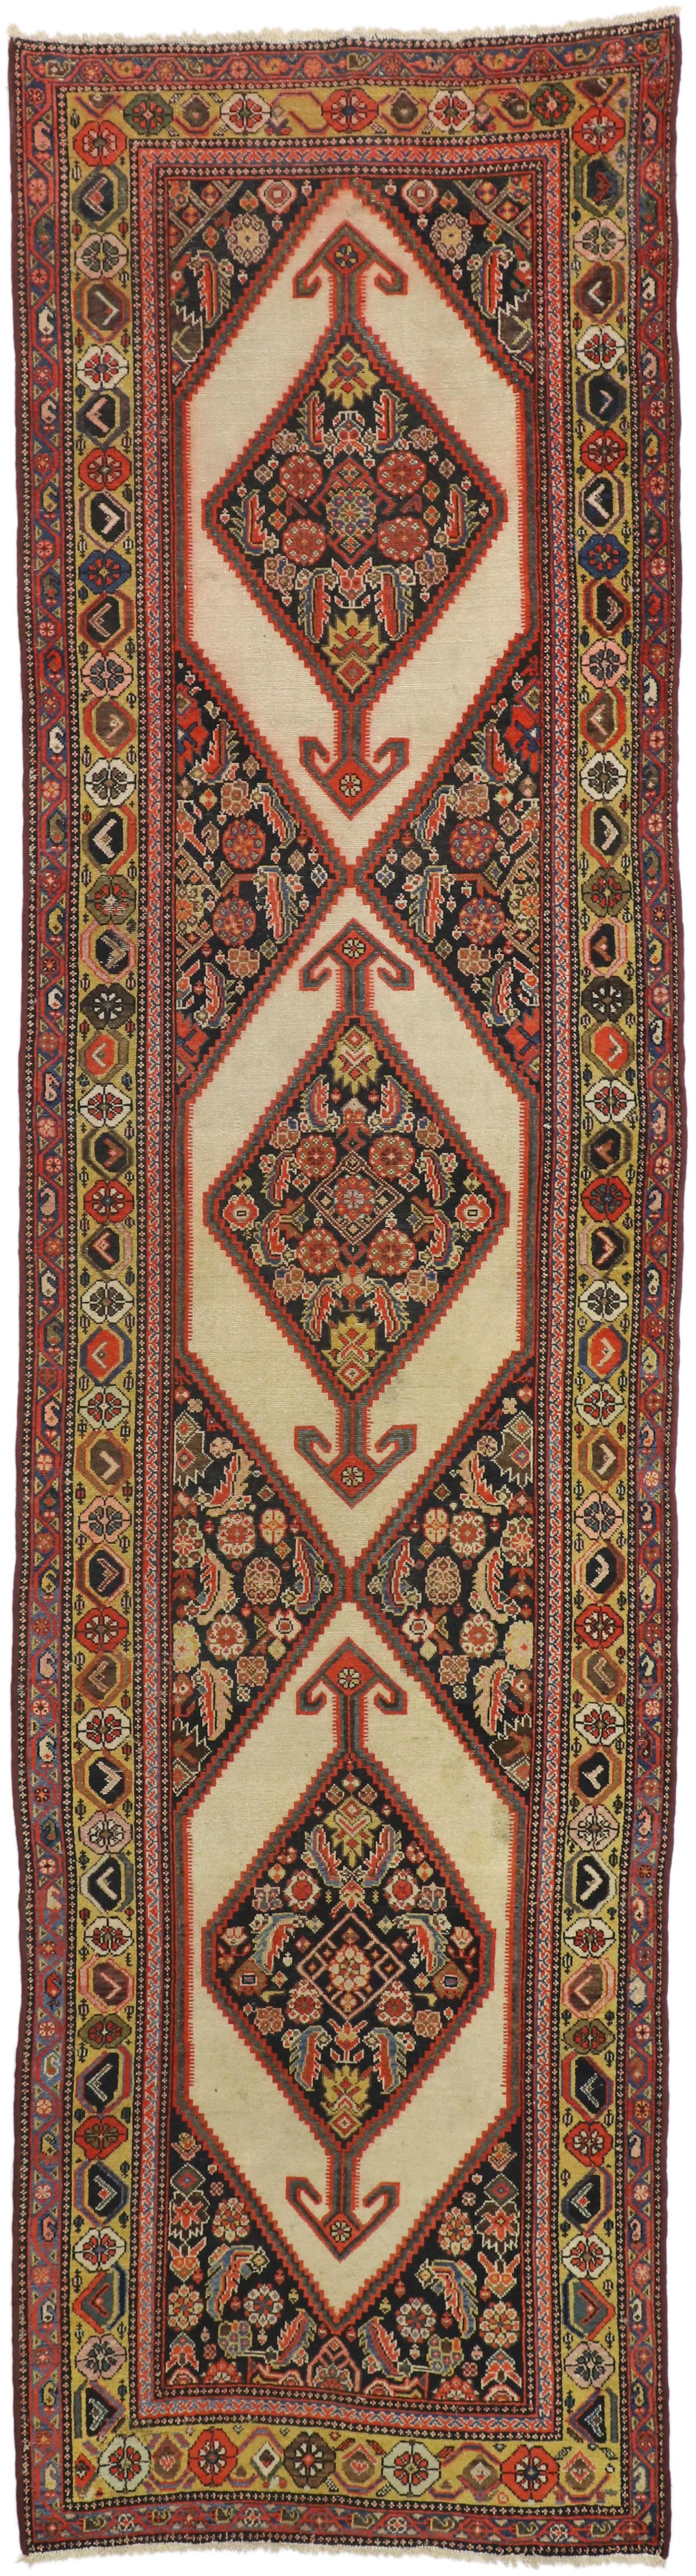 Antique Persian Malayer Runner with Tudor Manor House Style For Sale 4